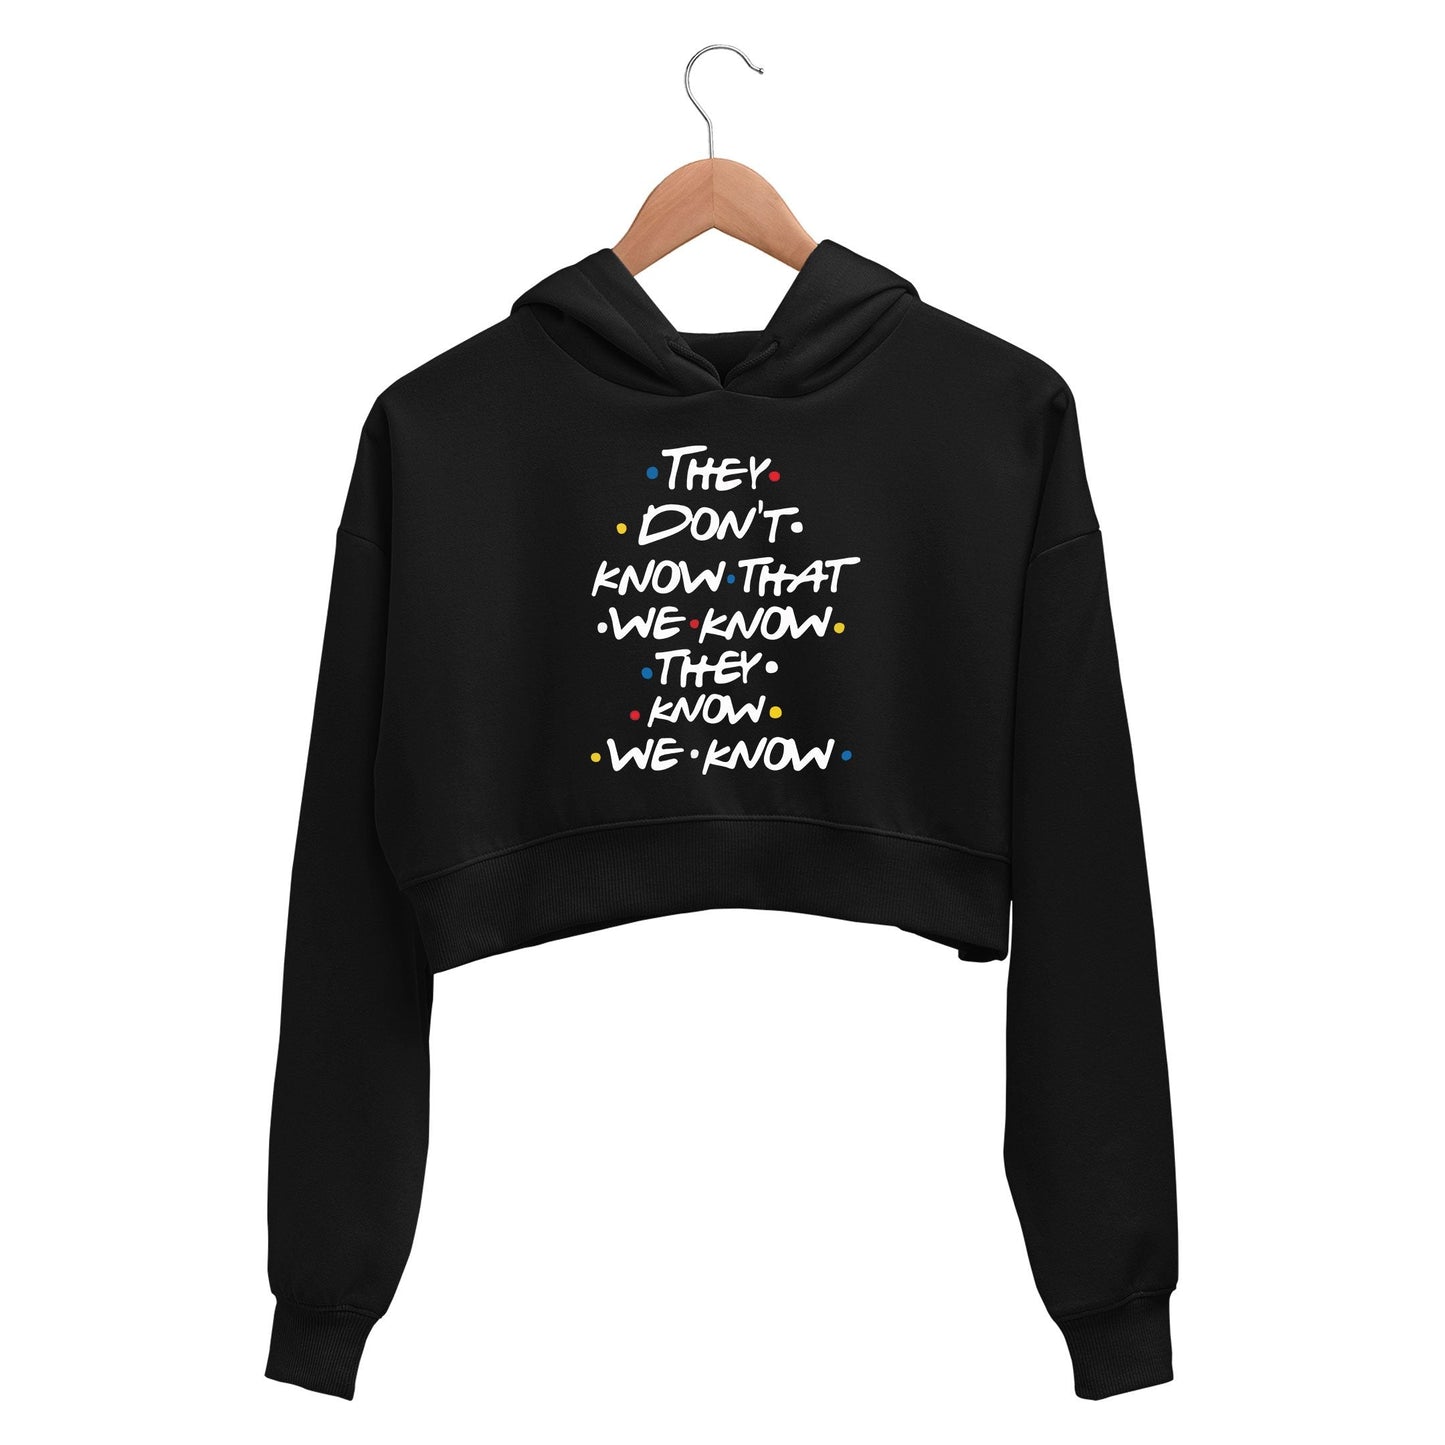 Friends Crop Hoodie - They Don't Know Crop Hooded Sweatshirt for Women The Banyan Tee TBT